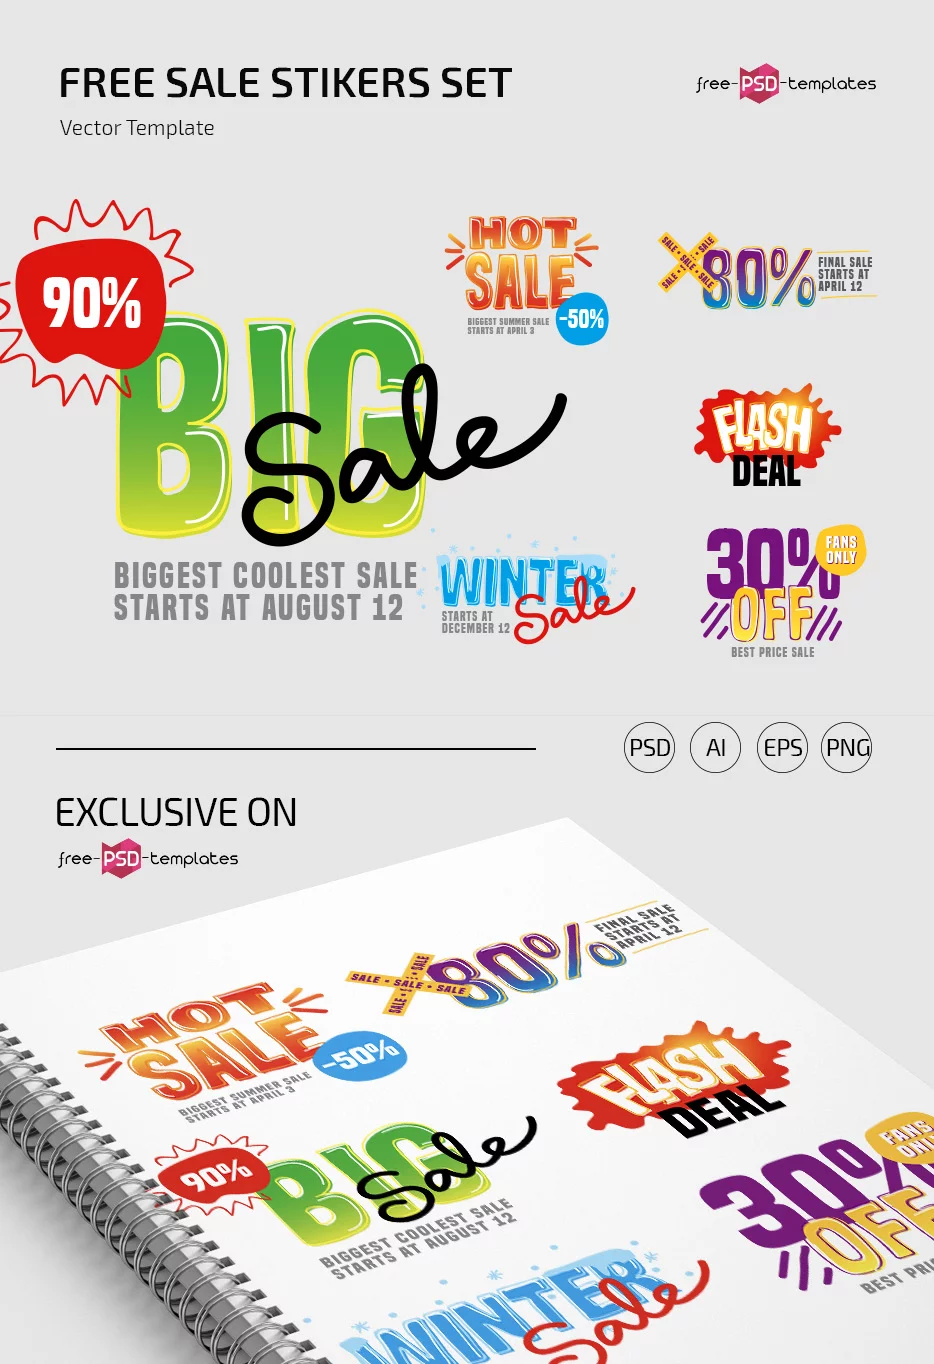 Free Vector Sale Stickers Set